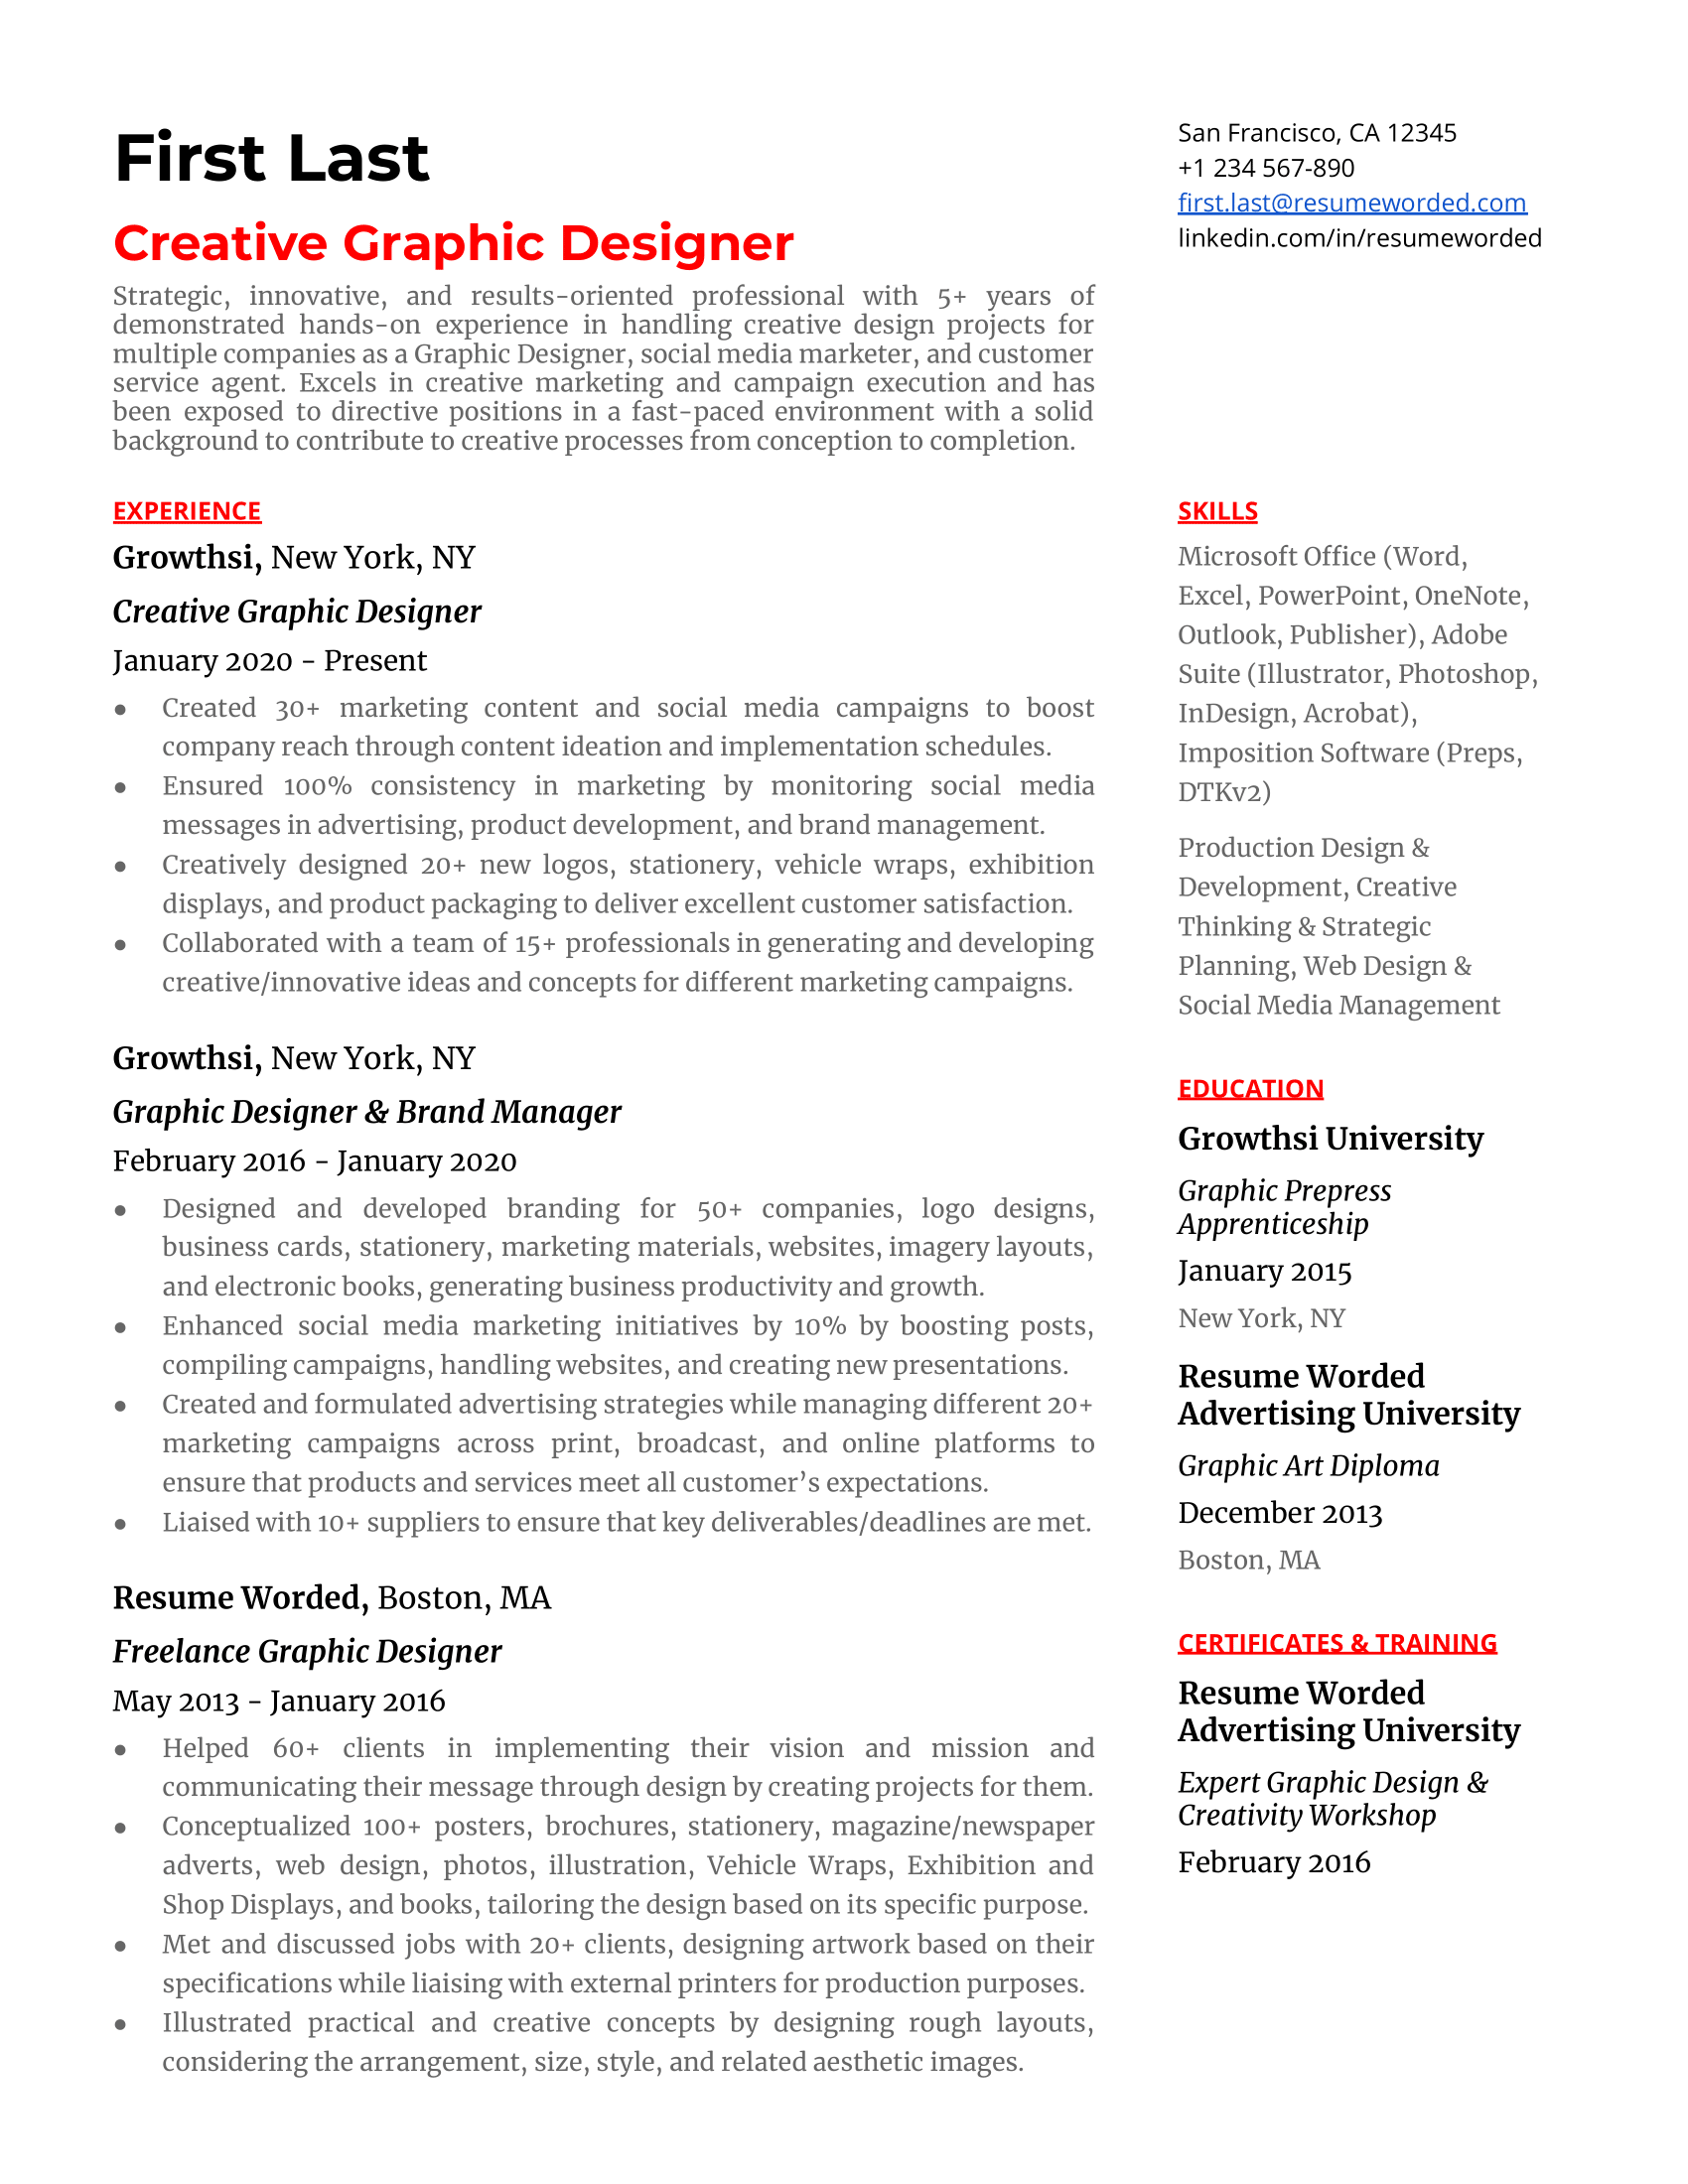 Creative graphic designer resume template example tailored to the specific job through a resume title, summary, and keywords